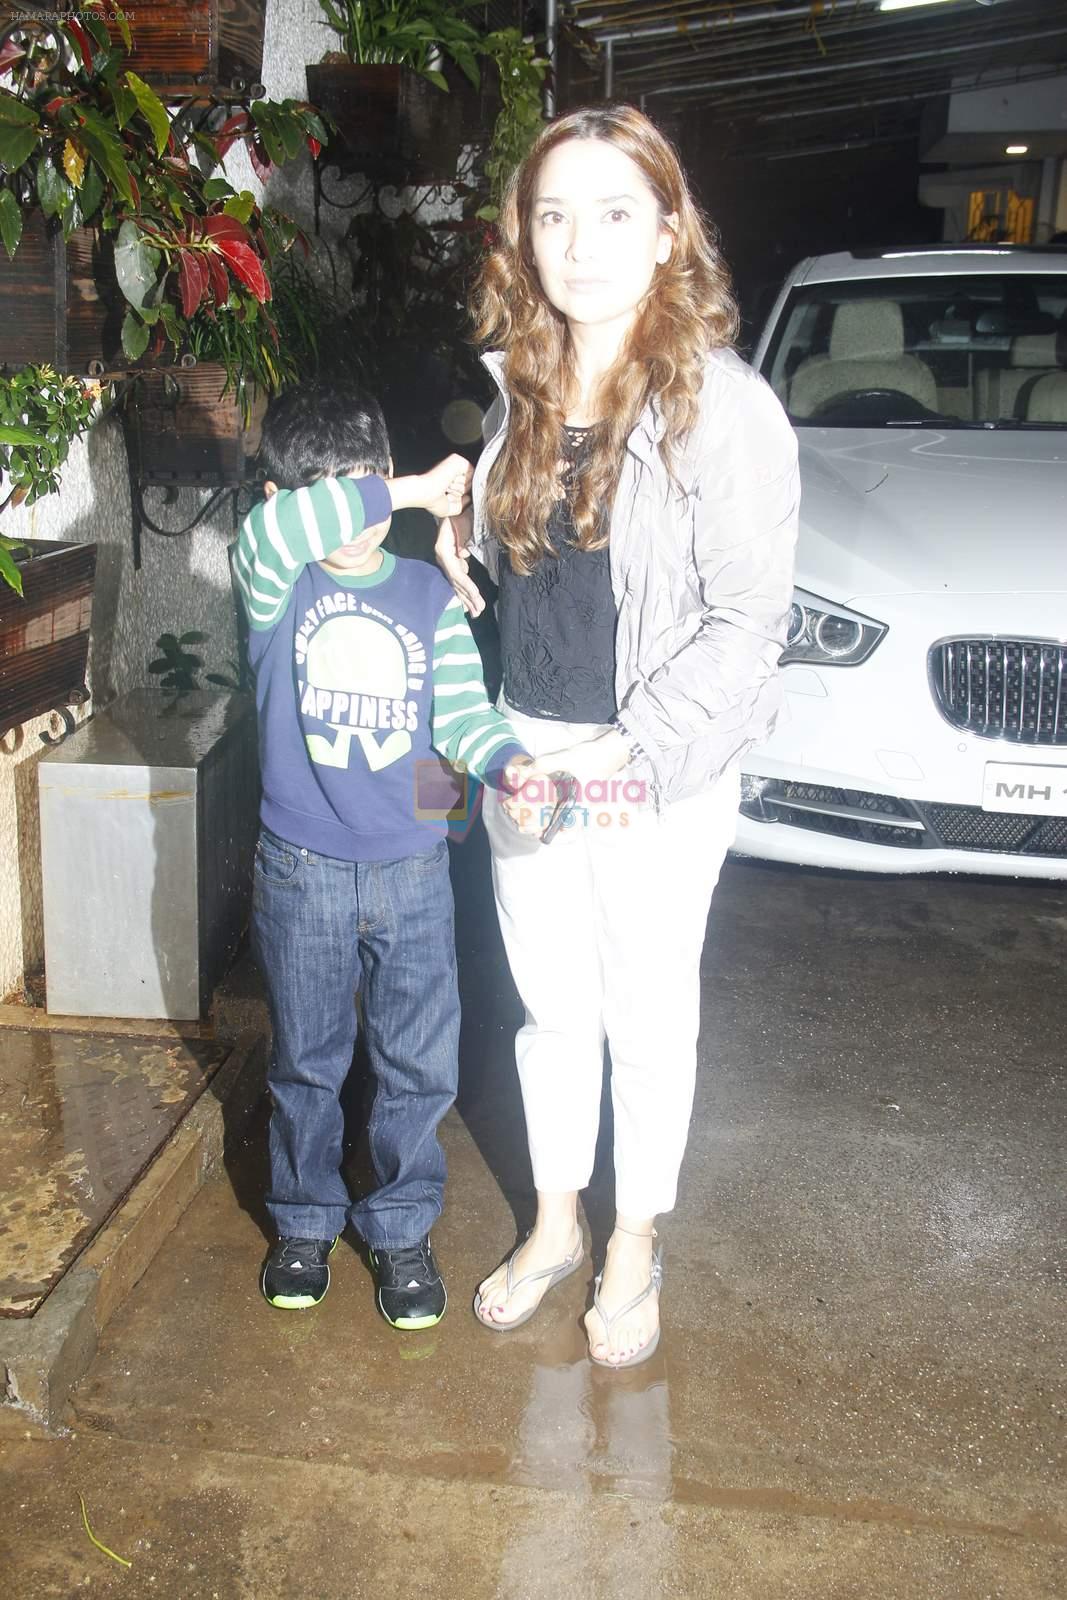 at ABCD 2 screening in Sunny Super Sound on 18th June 2015